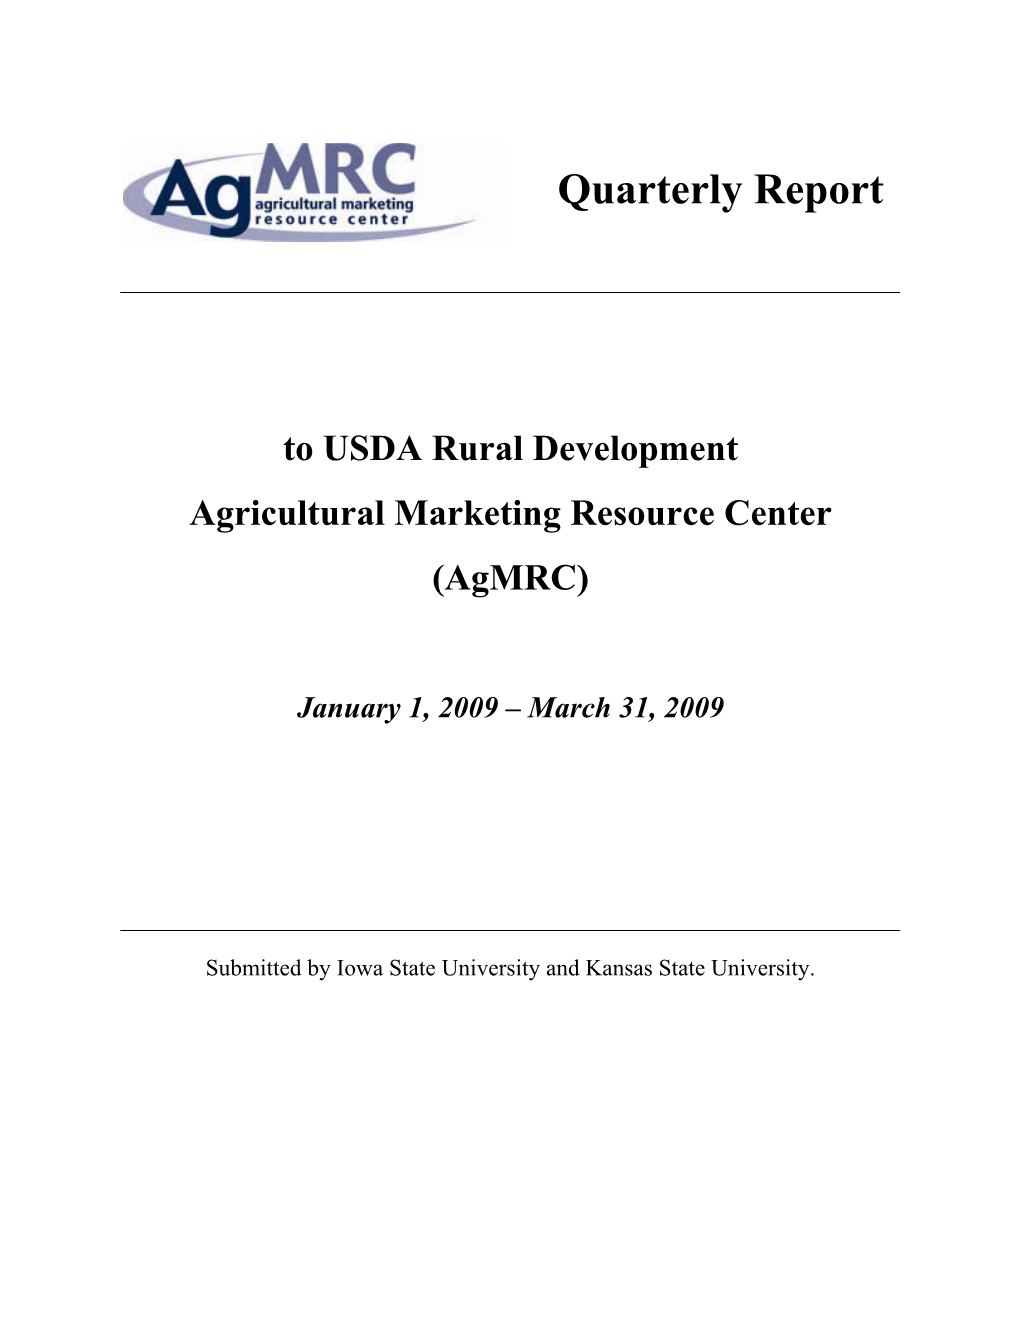 Quarterly Report to USDA Rural Development Agricultural Marketing